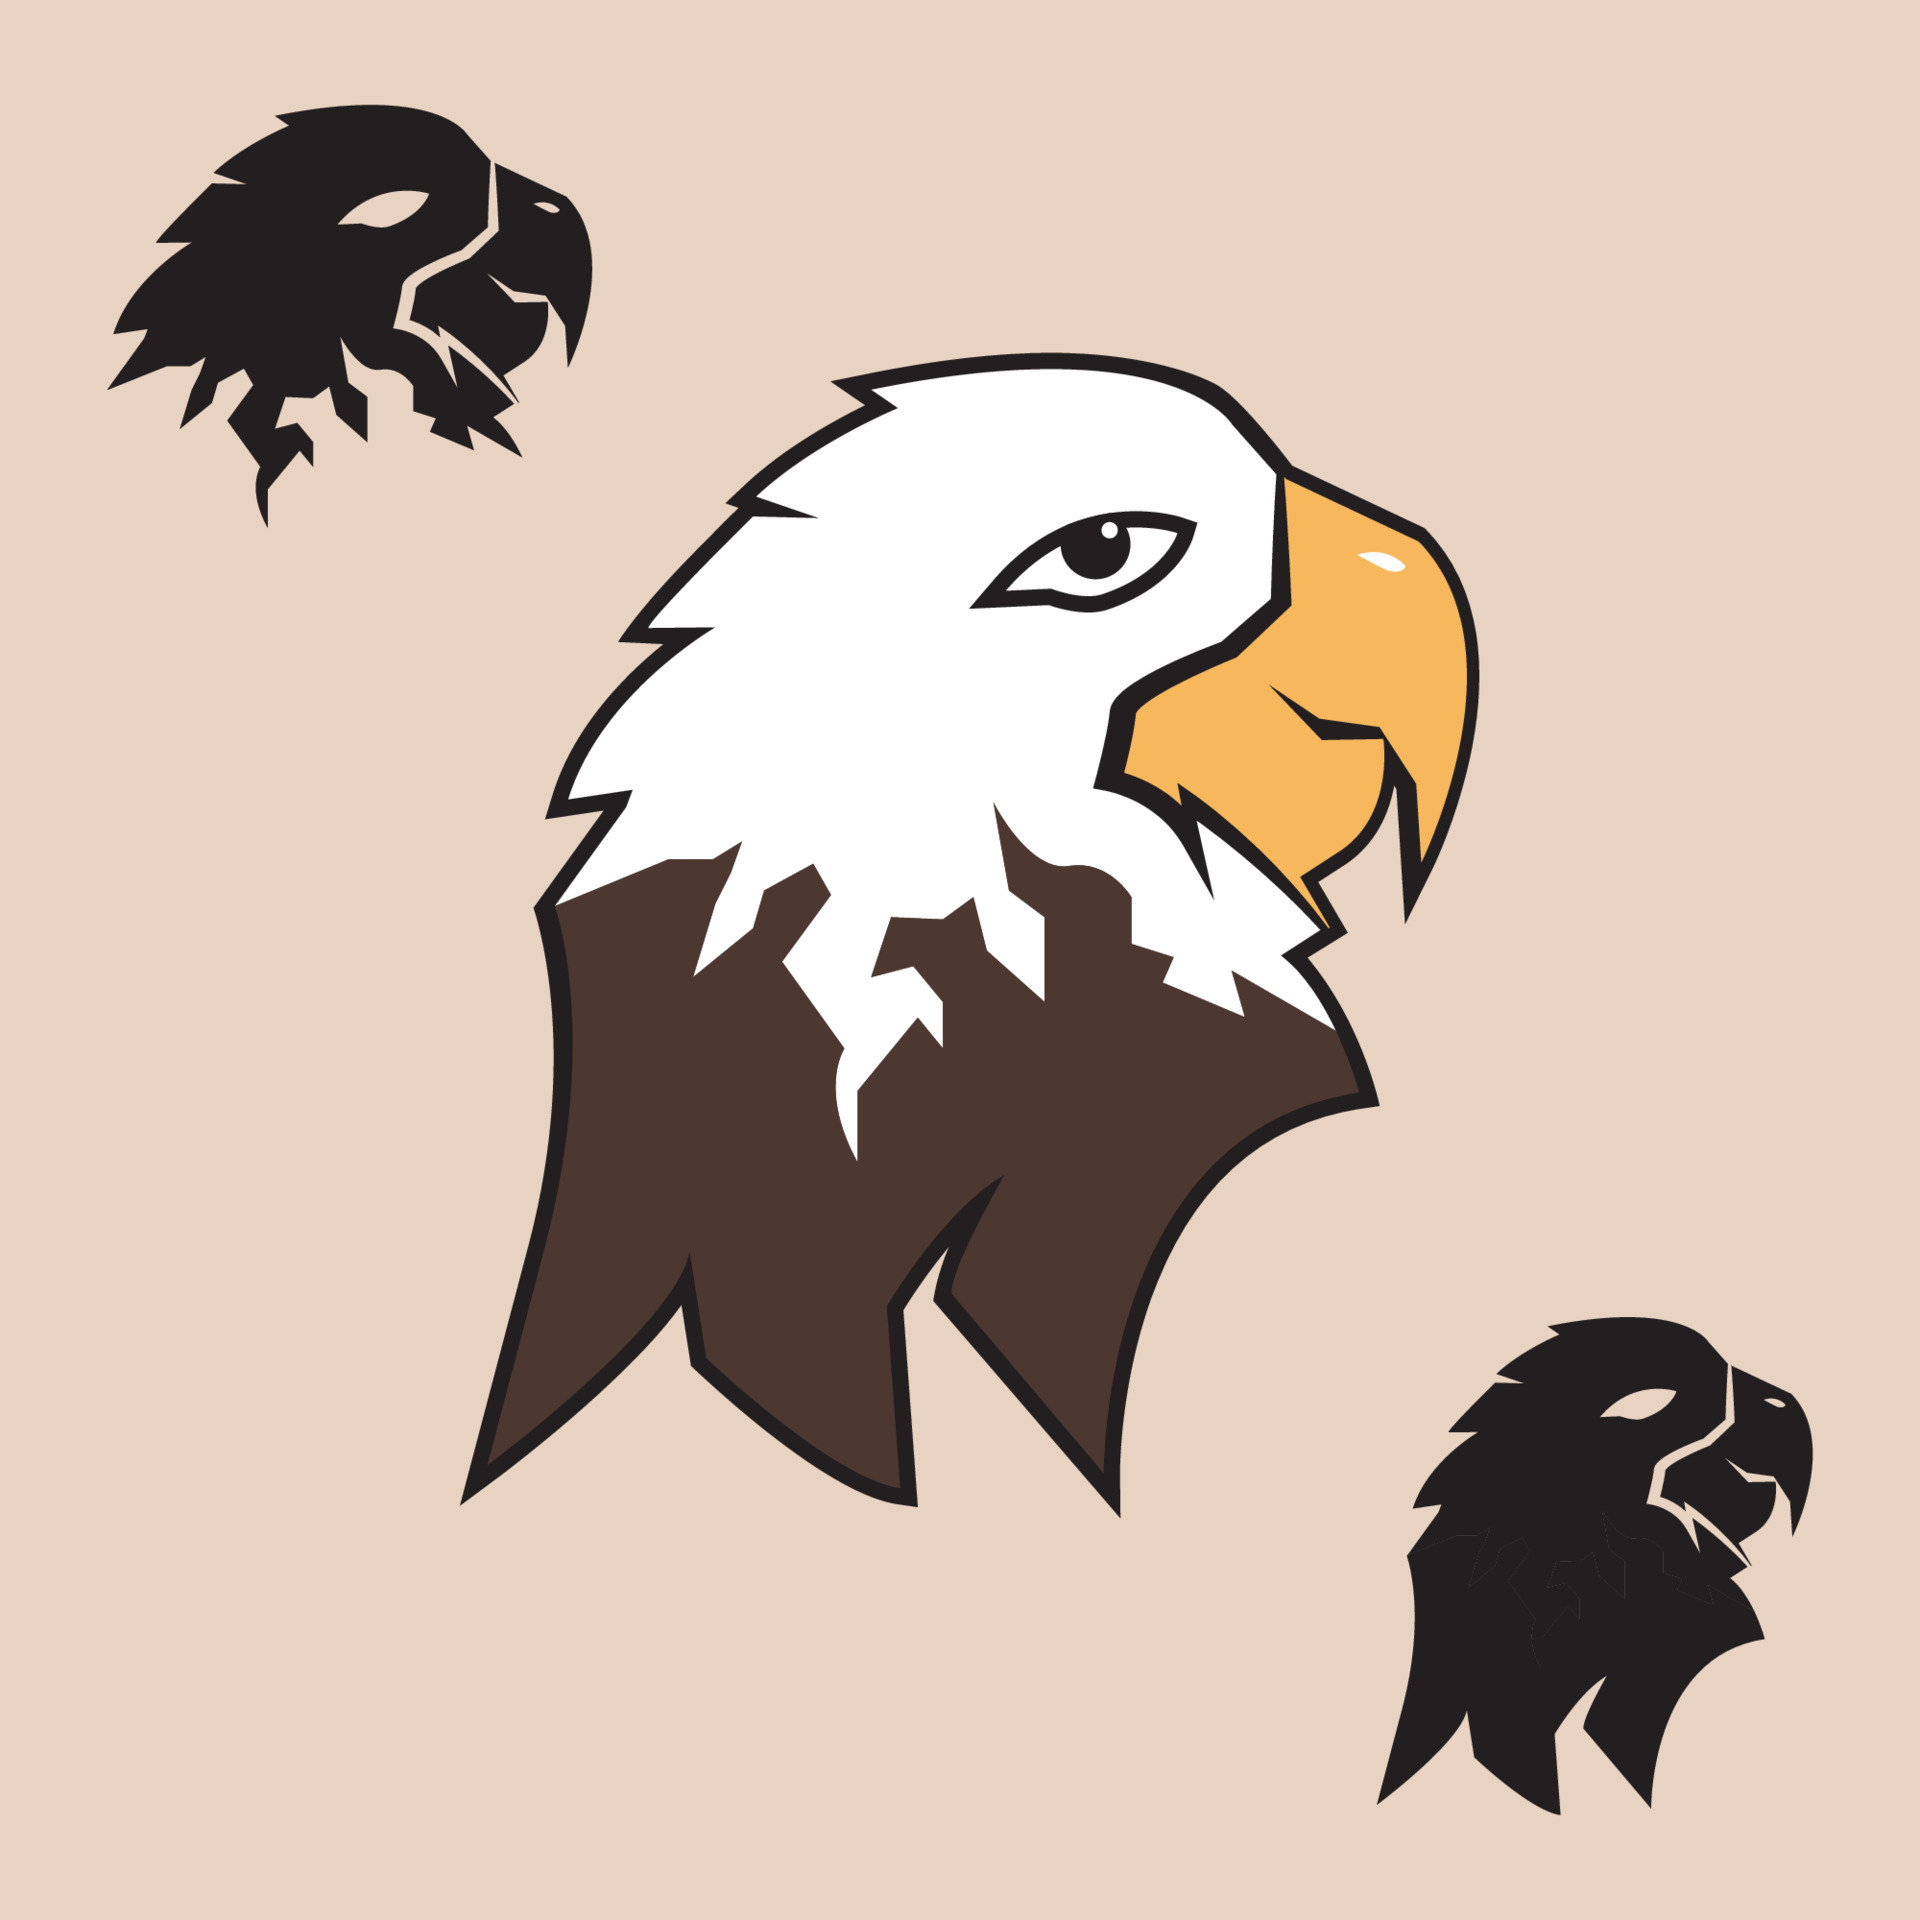 How to Draw an Eagle Head - DrawingNow